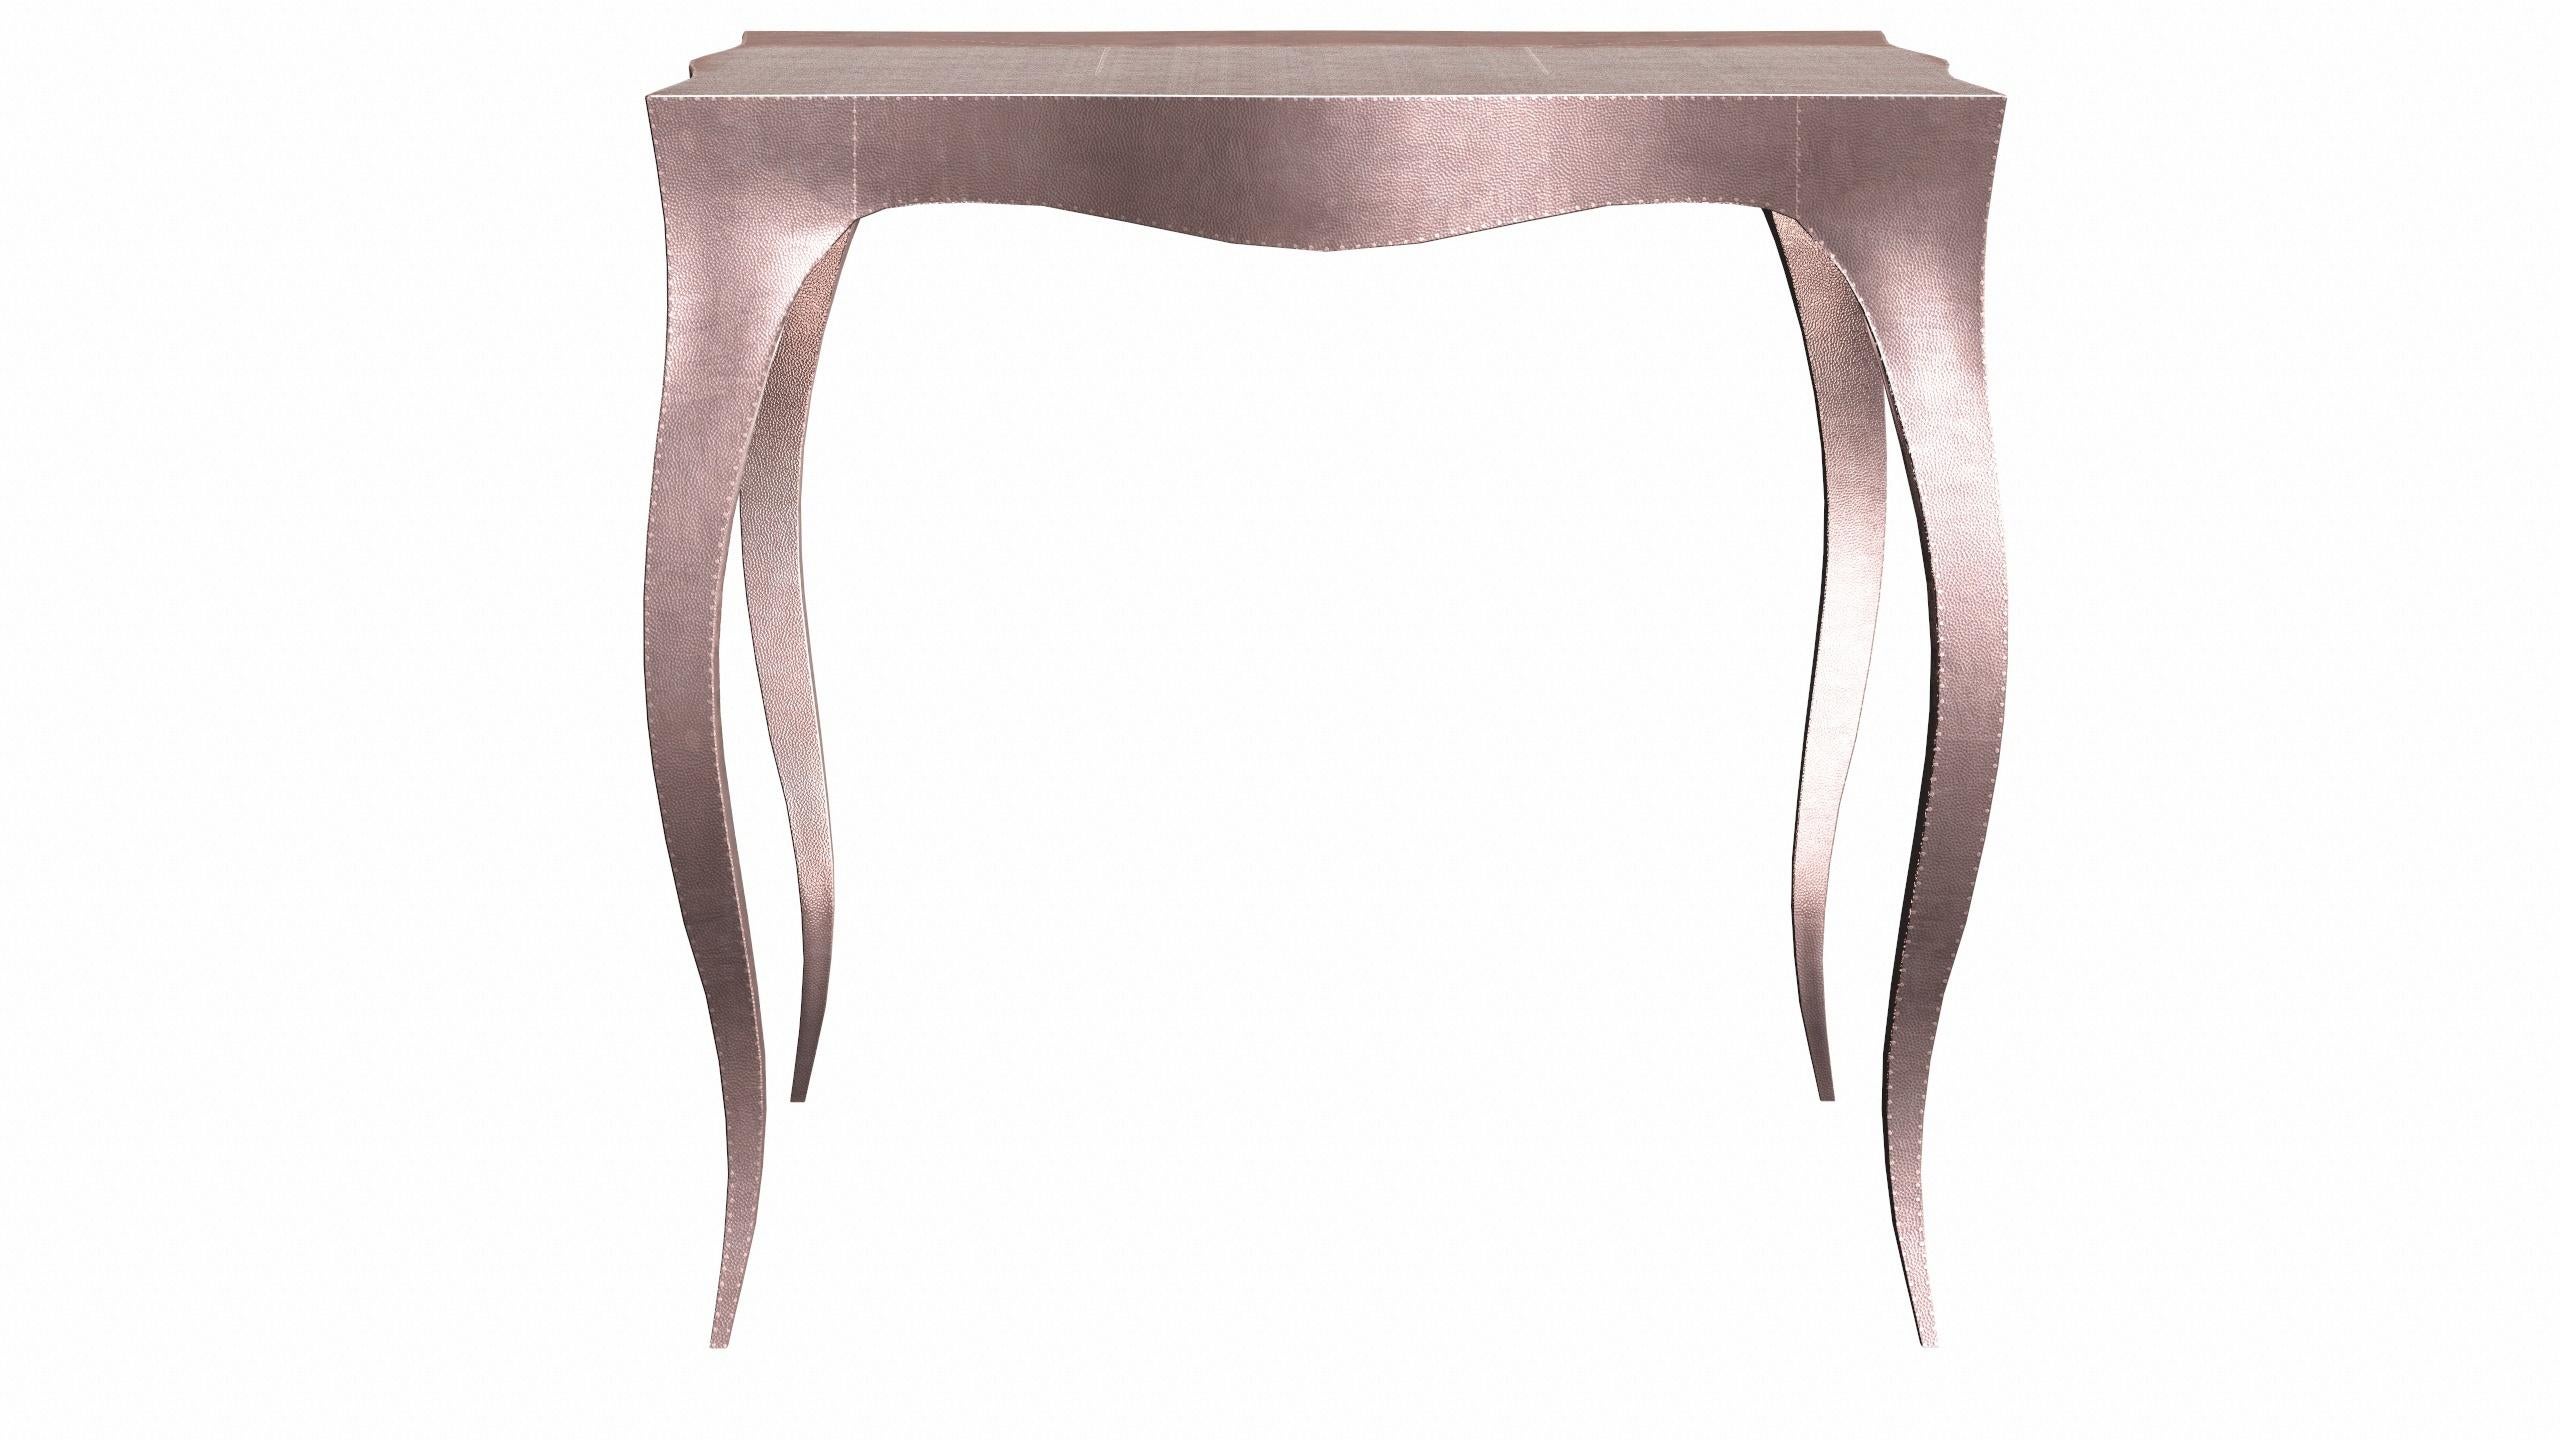 American Louise Art Deco Center Tables Mid. Hammered Copper by Paul Mathieu  For Sale